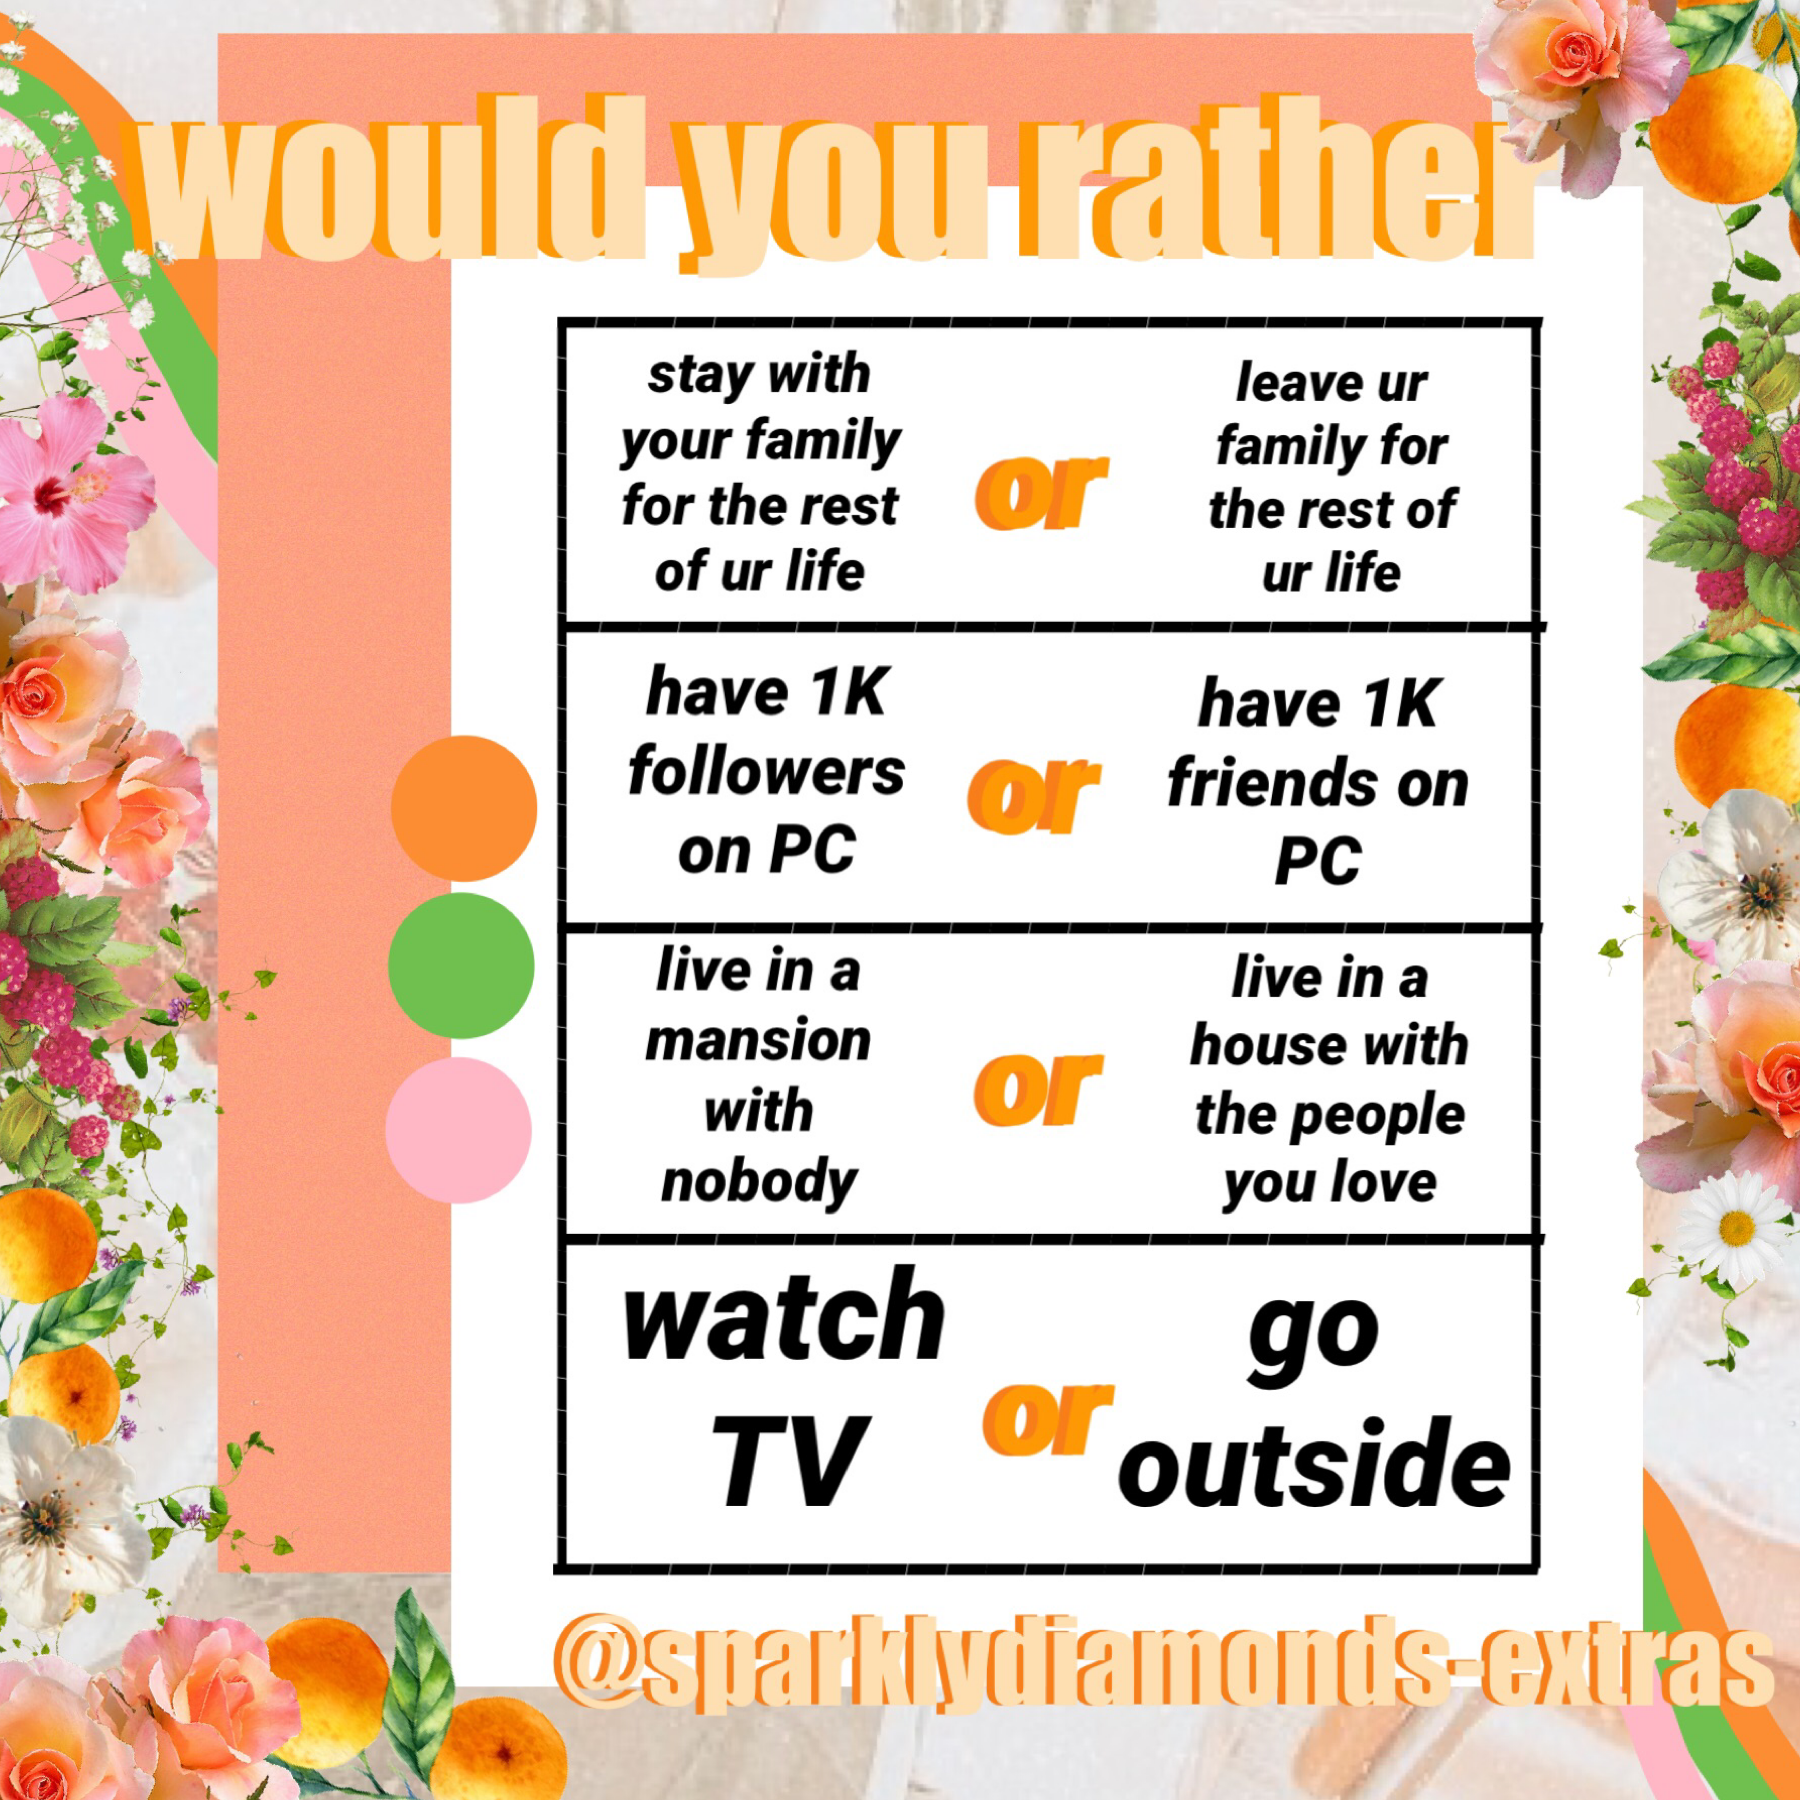 would you rather...(Tap)

Credit to @blossomedsoul for the layout :) and how are y guys doing?